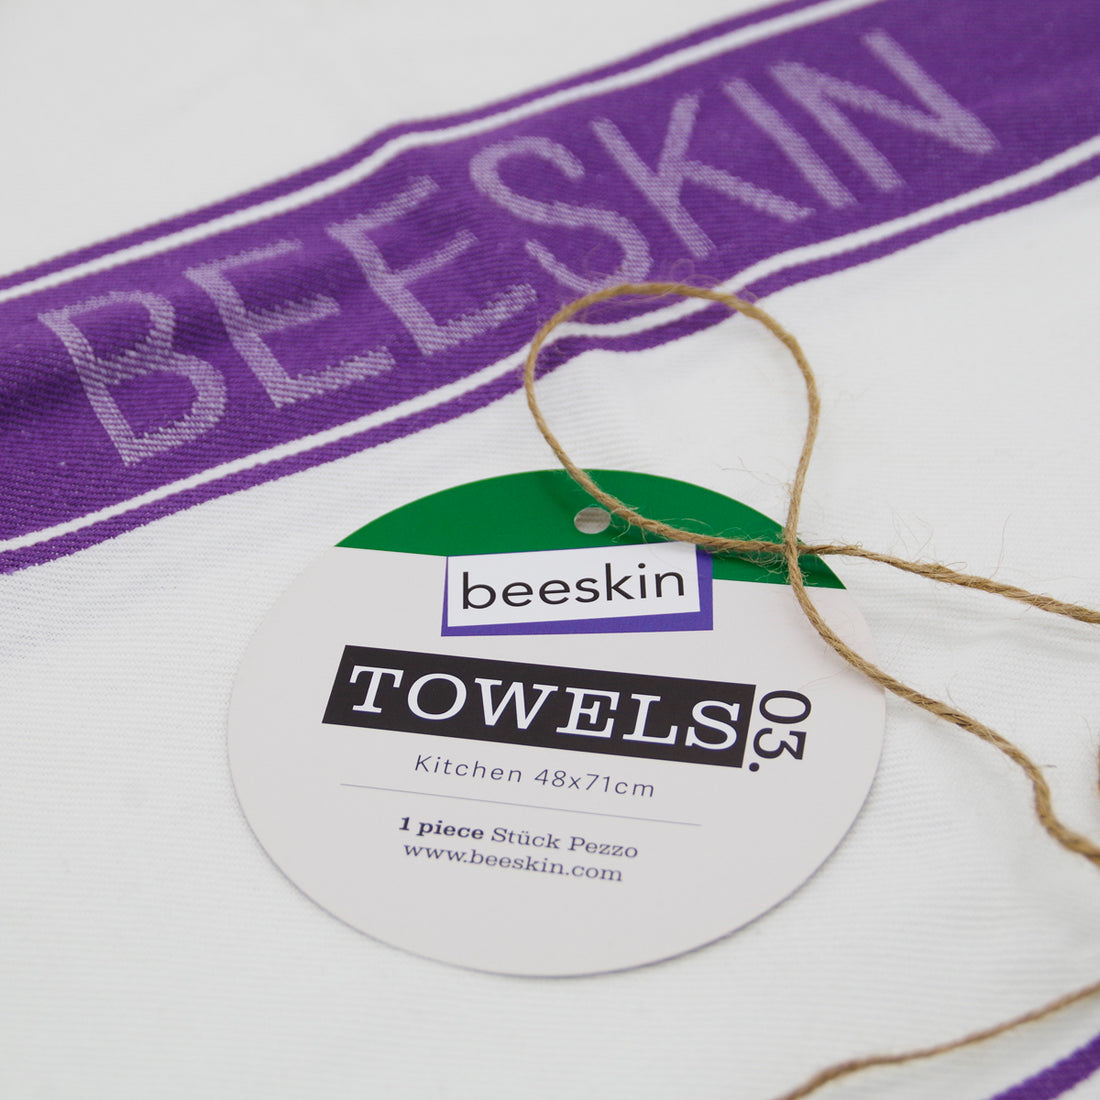 unfolded tea towel white/purple with beeskin logo, the tag lies on it